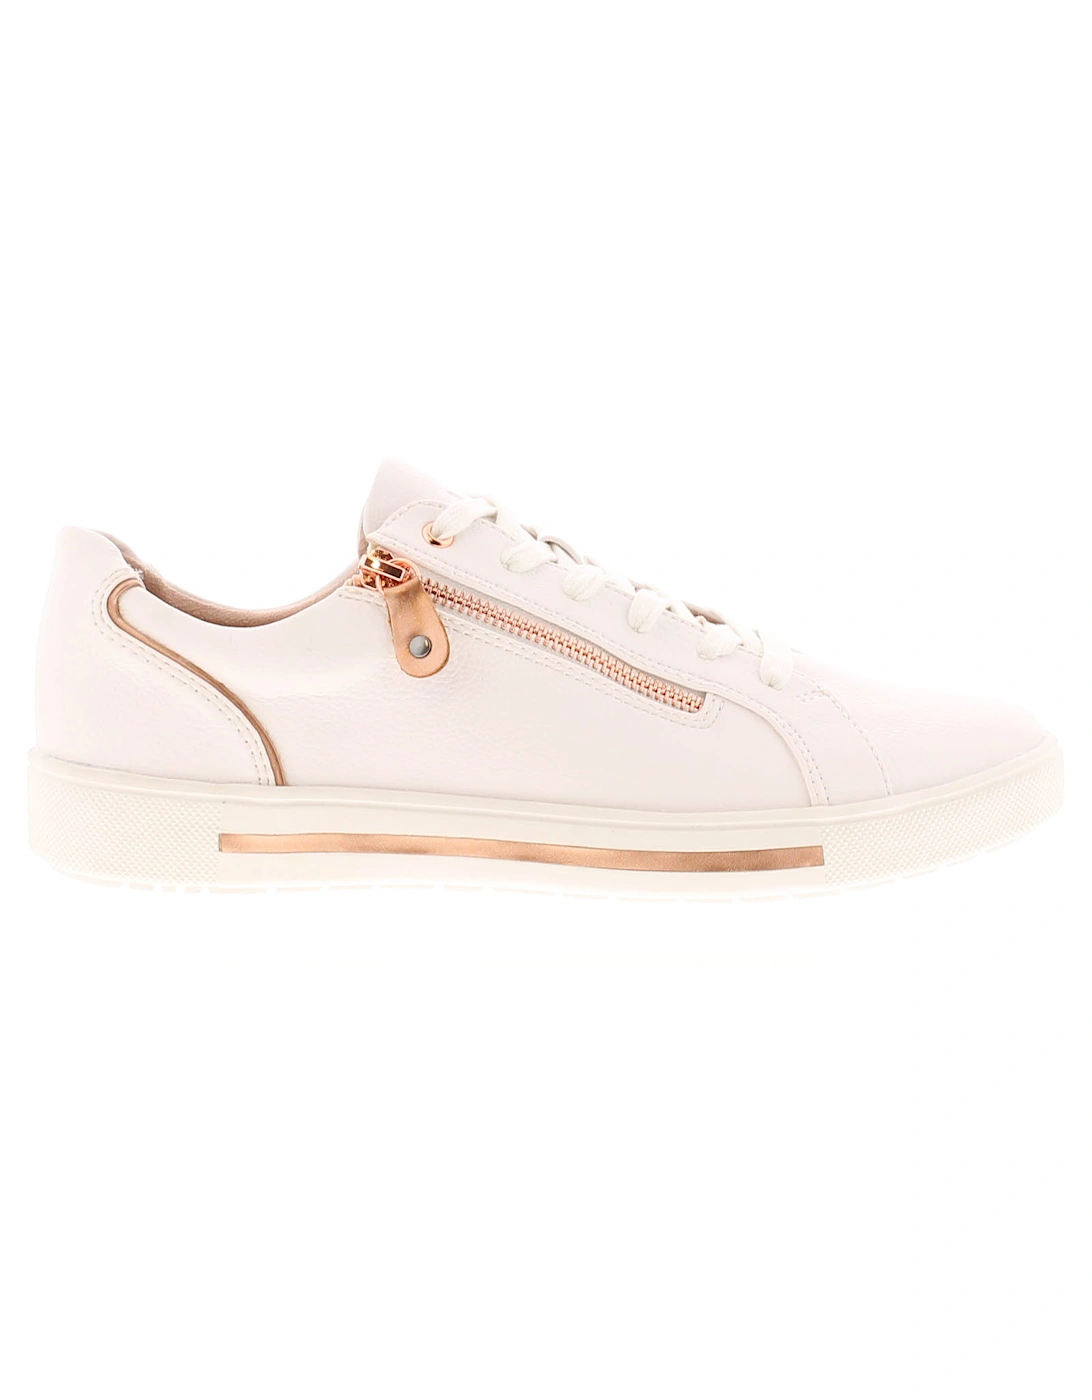 Womens Chunky Trainers Jane Lace Up white rose gold UK Size